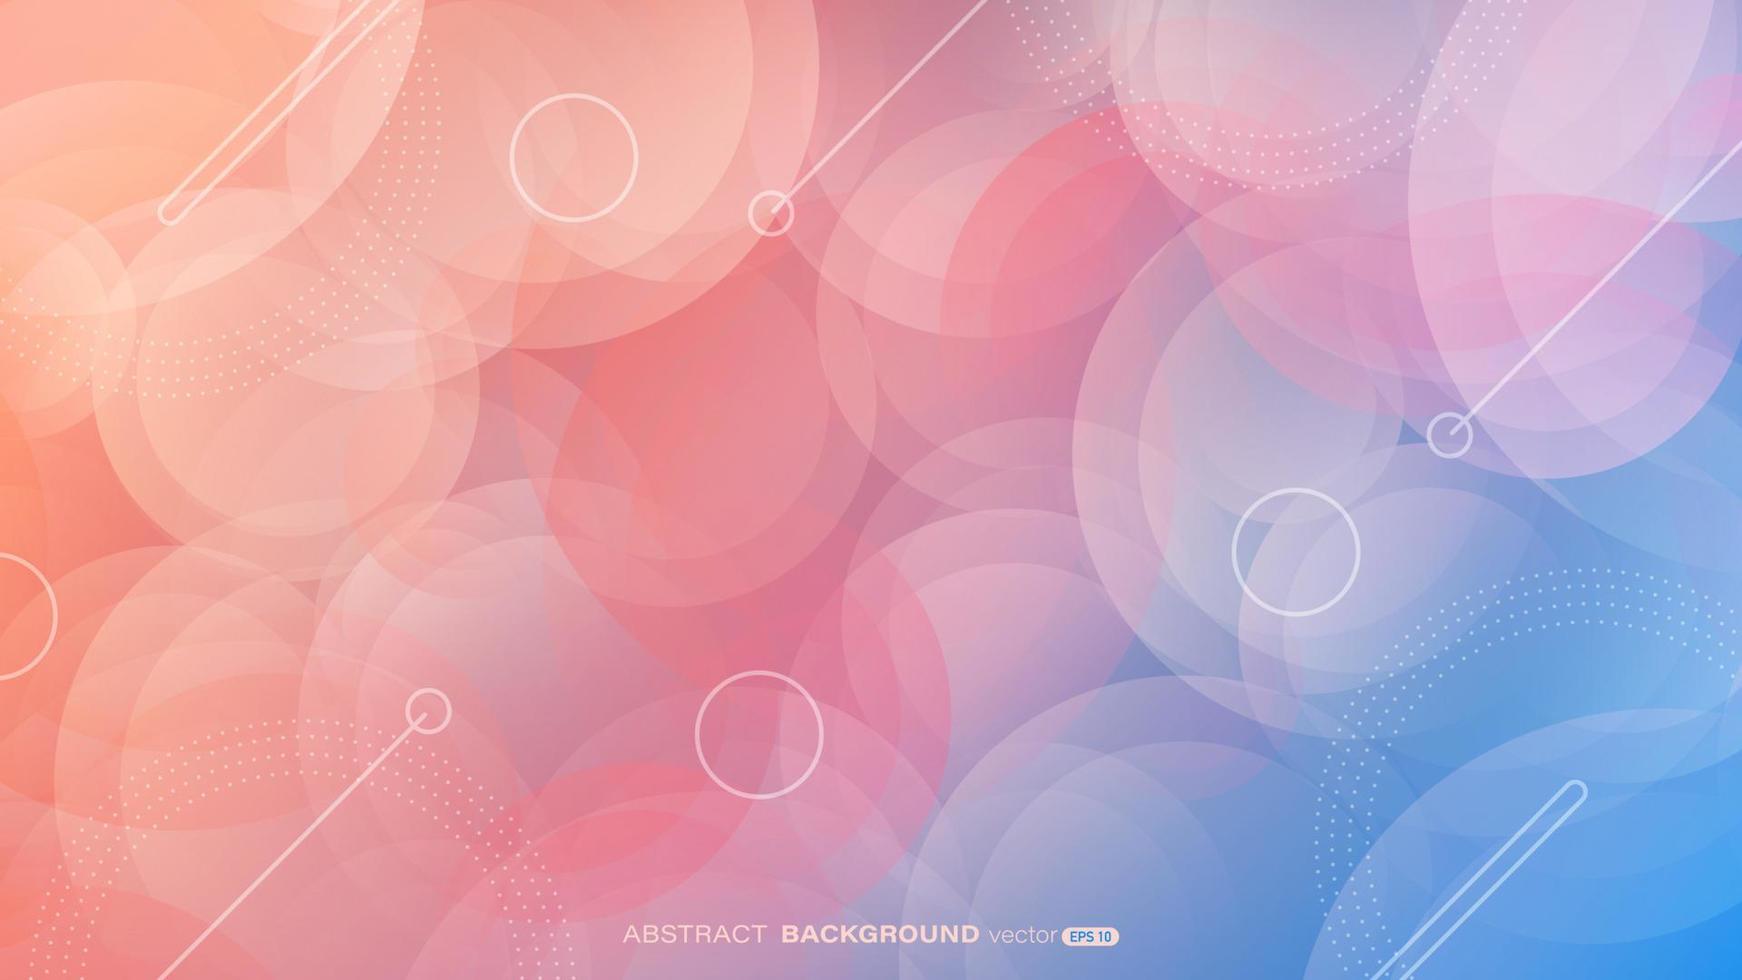 Geometric abstract background with overlapping colorful circles design elements vector